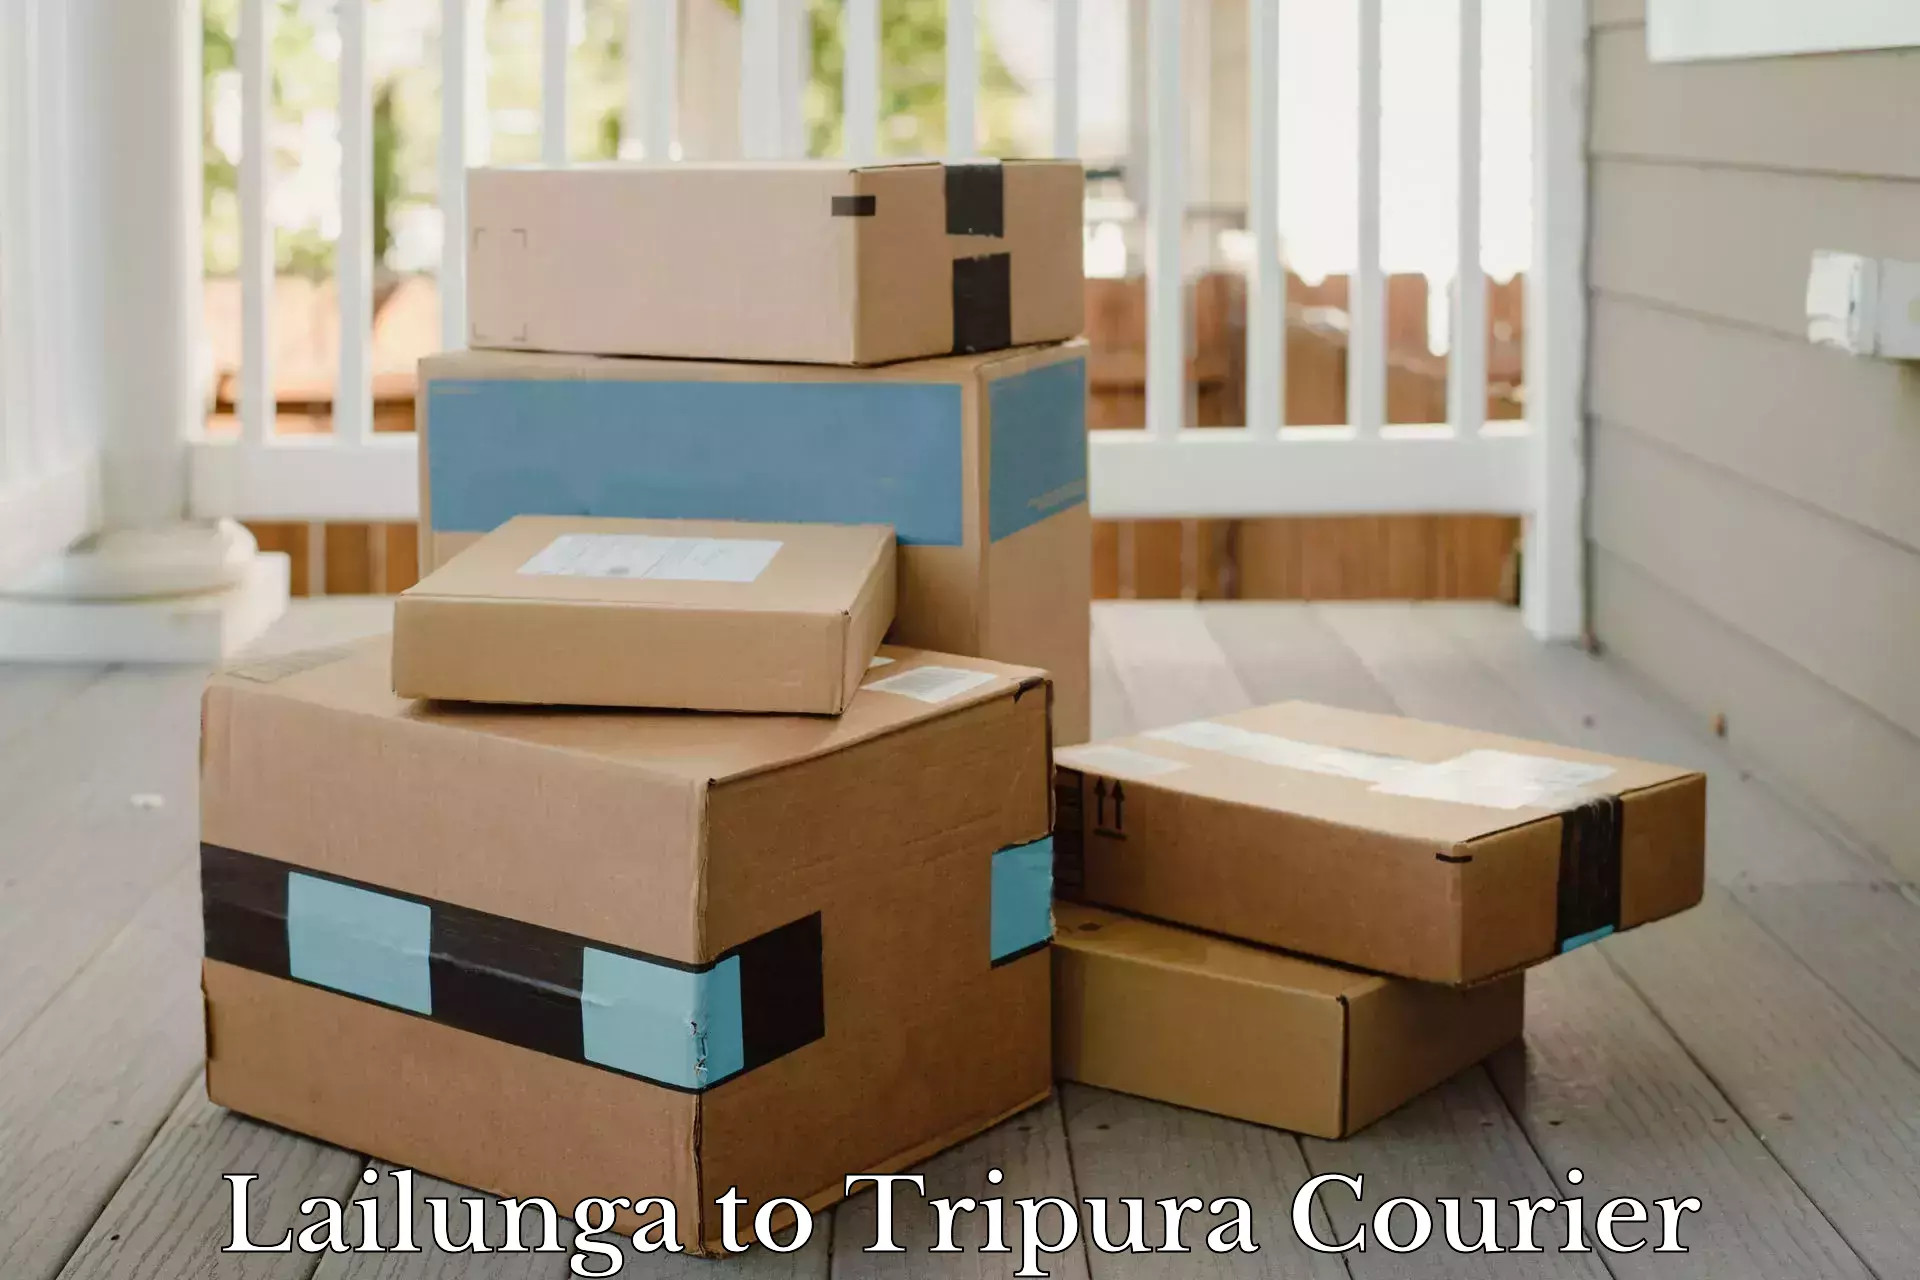 Courier services in Lailunga to West Tripura